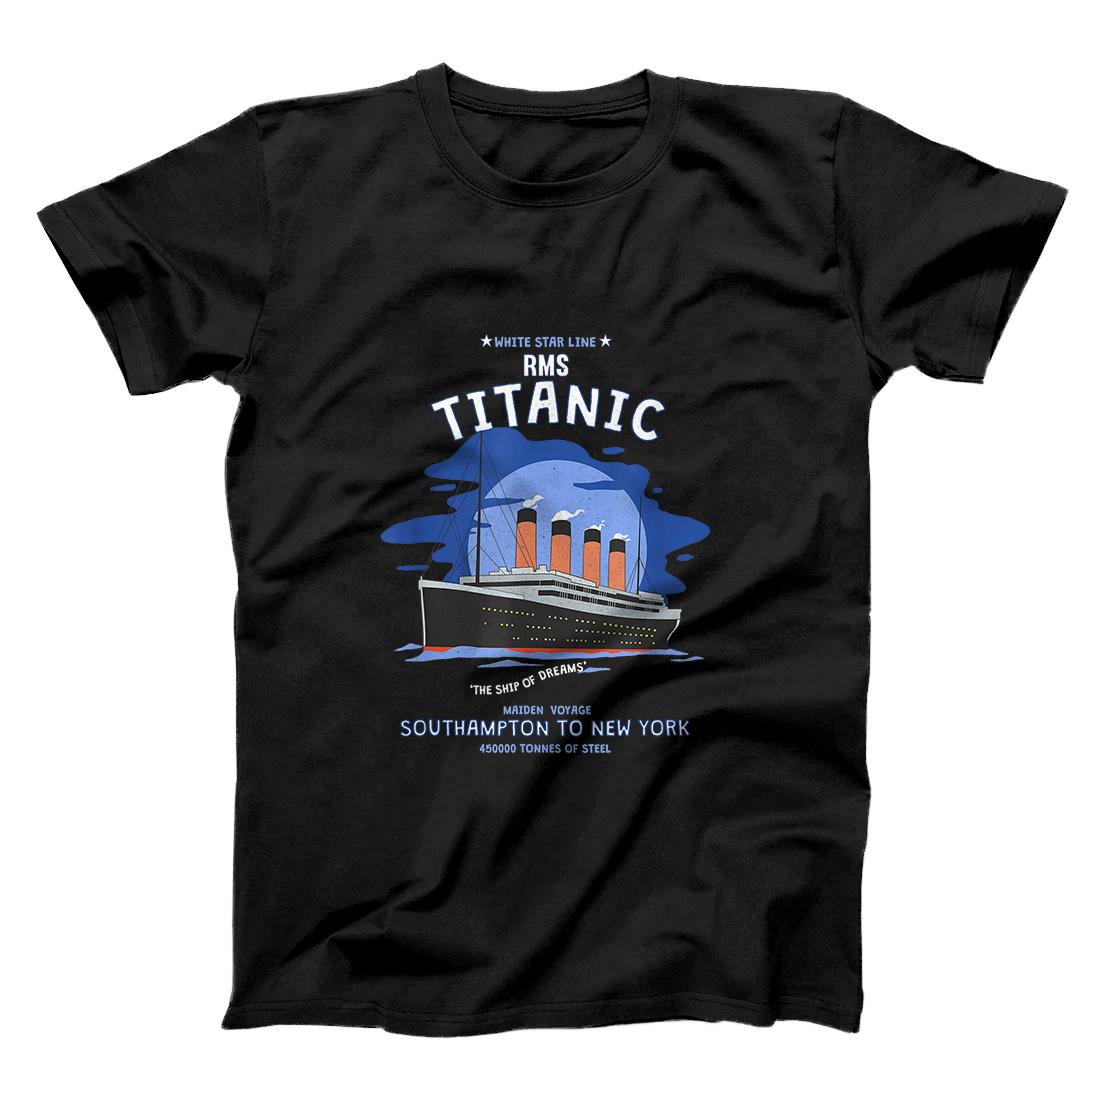 Personalized Titanic "The Ship of Dreams" White Star Line RMS T-Shirt